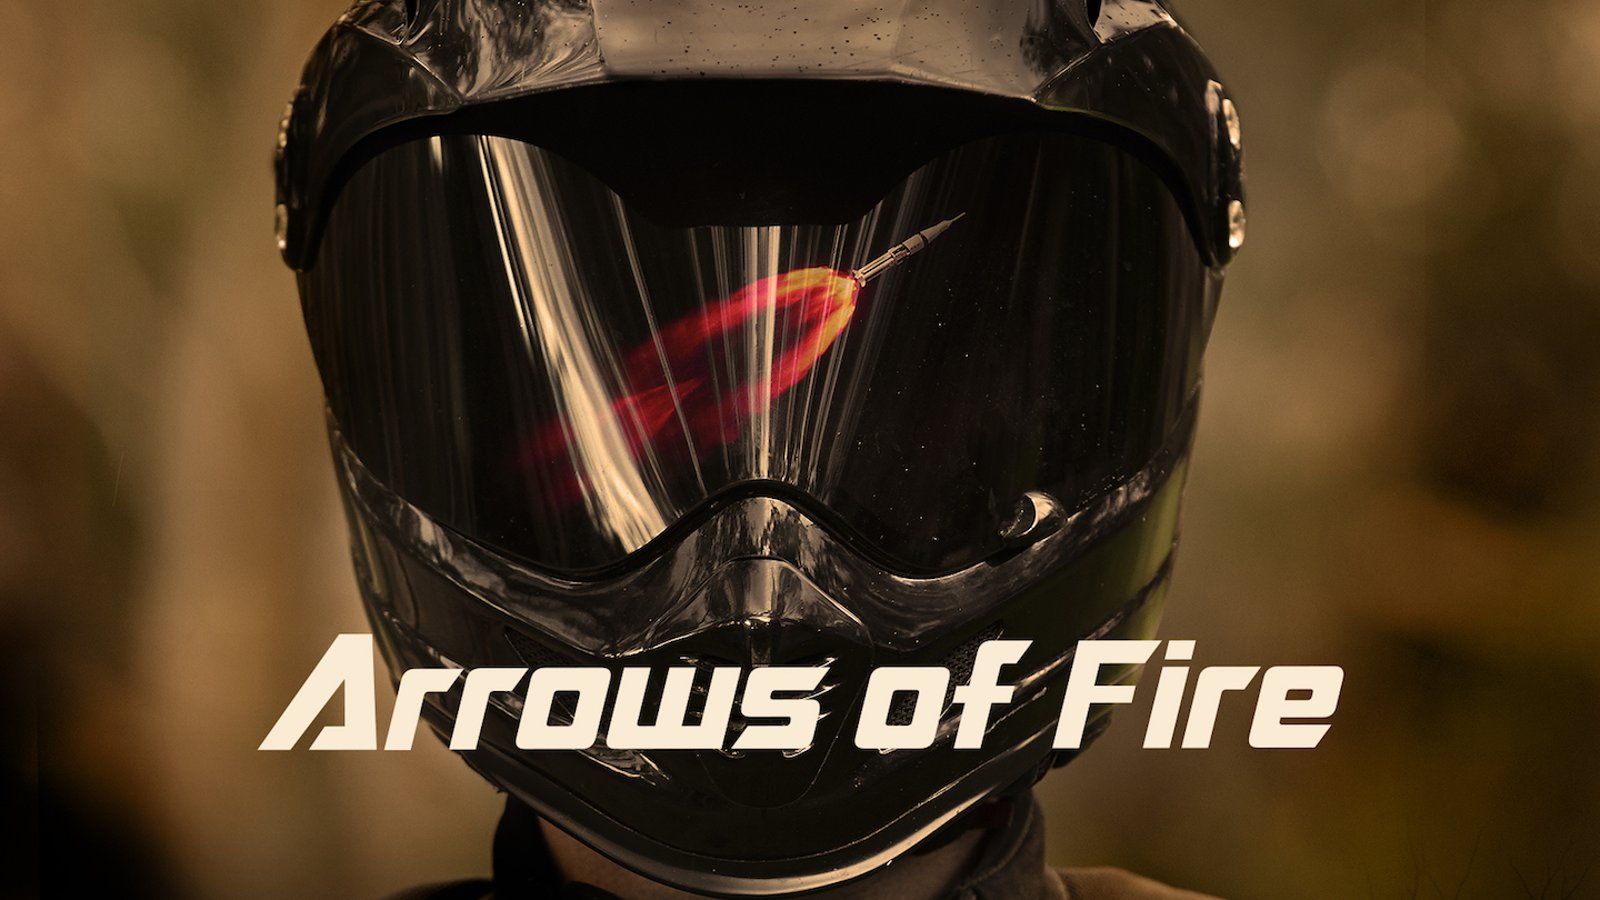 Arrows of Fire - Riding Across the Australian Outback